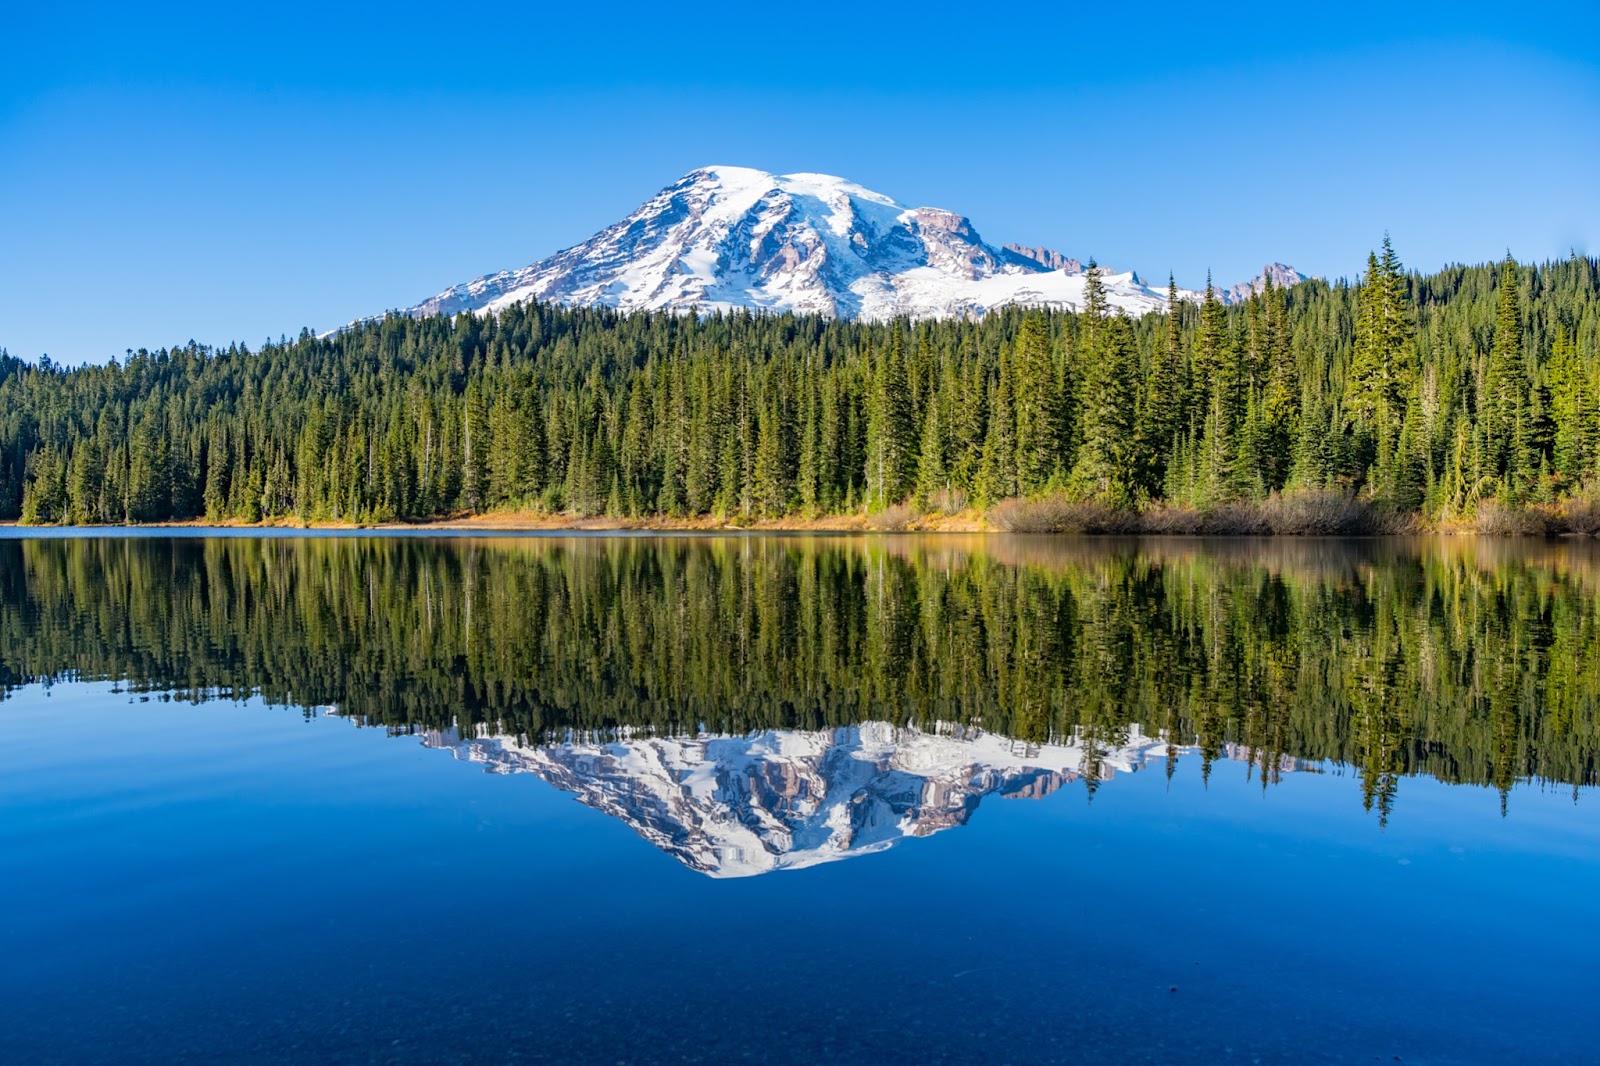 mount rainier with reflection on the water